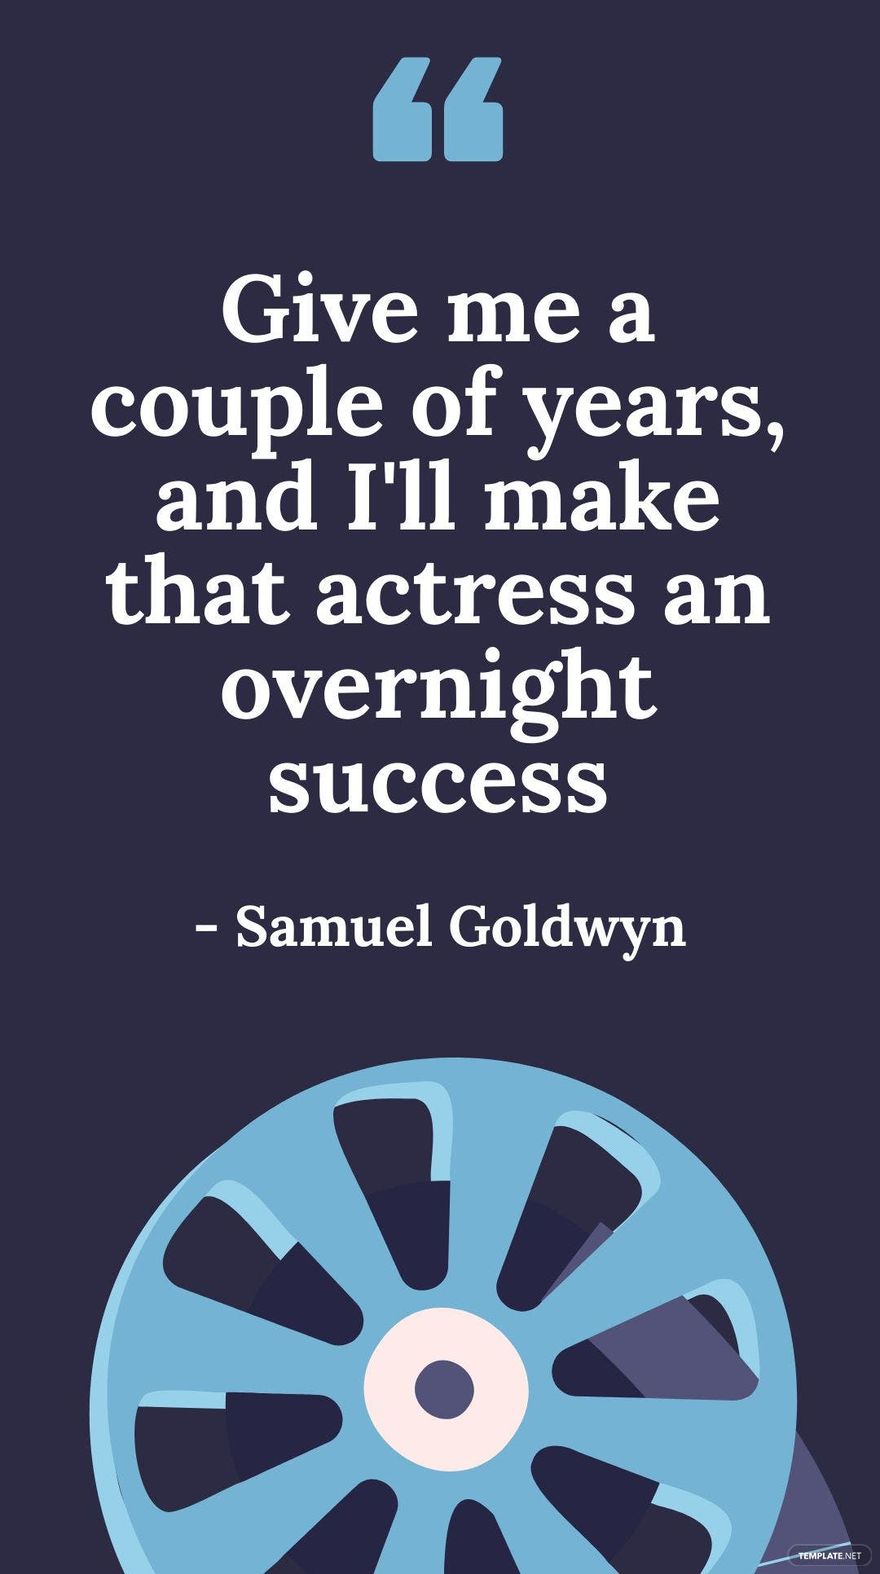 Samuel Goldwyn - Give me a couple of years, and I'll make that actress an overnight success